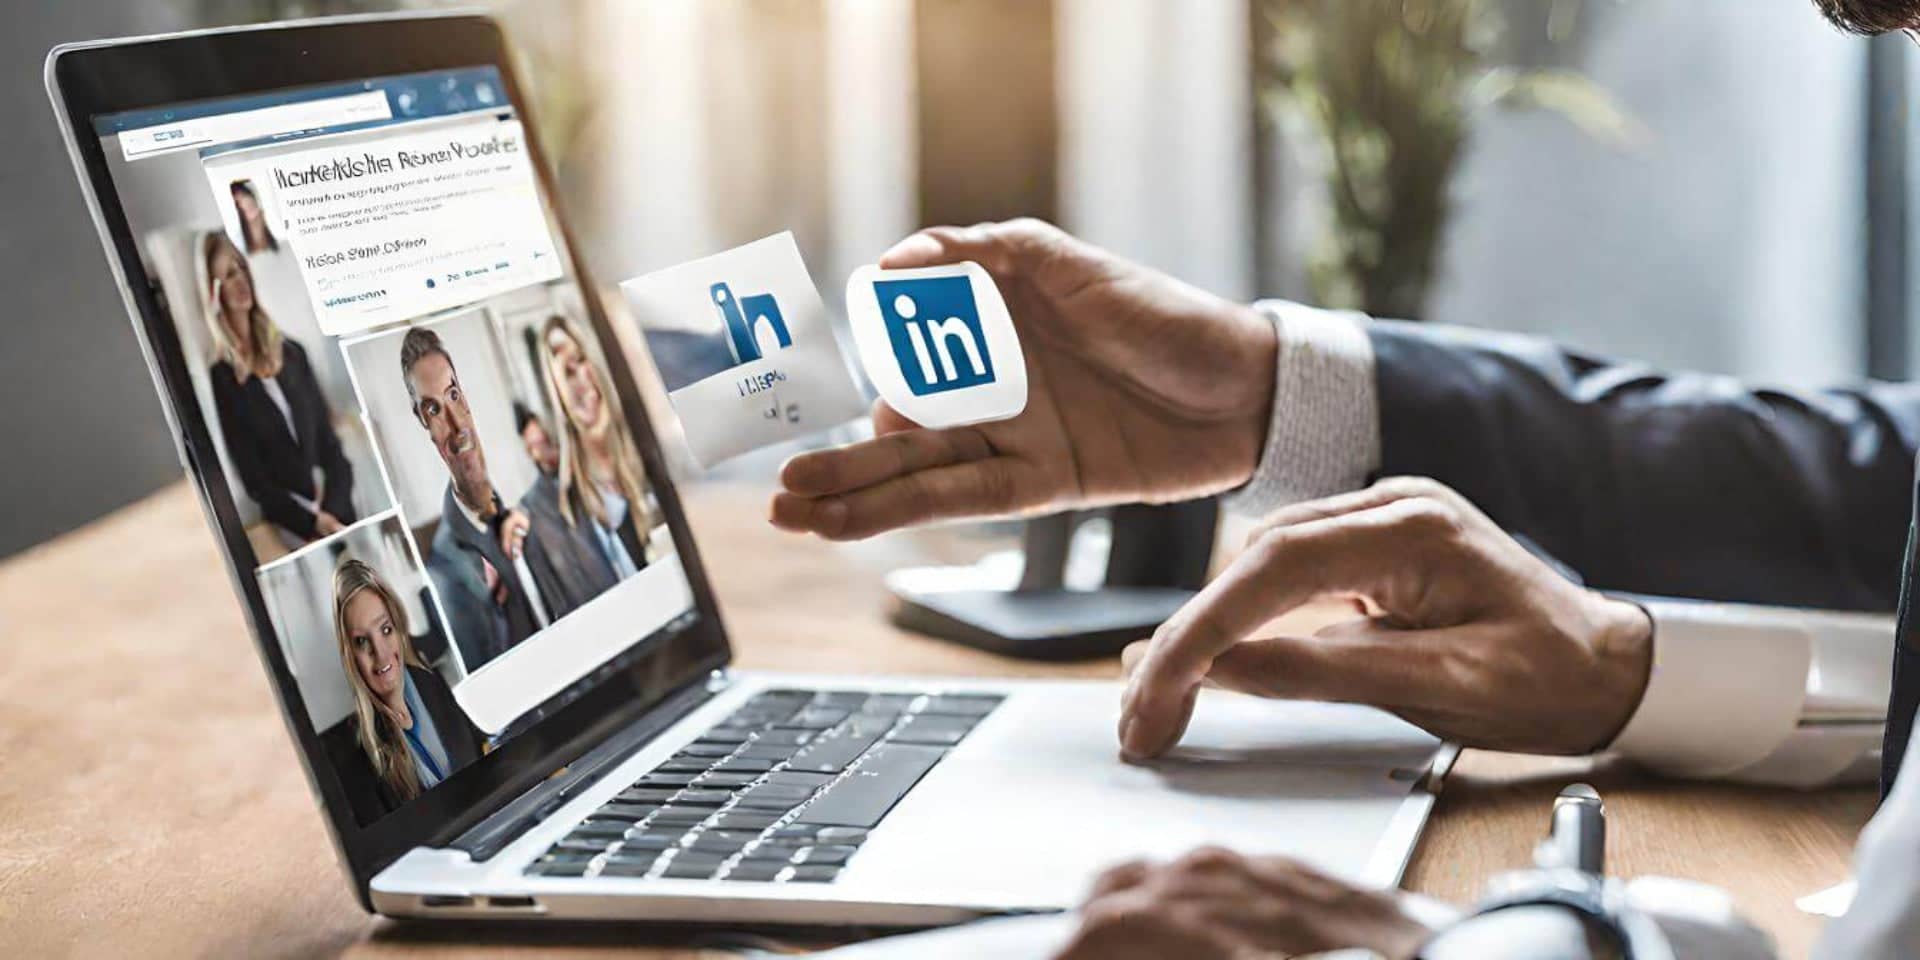 We Offer Expert Linkedin Profile Writing & Optimization Services To Elevate Your Professional Brand